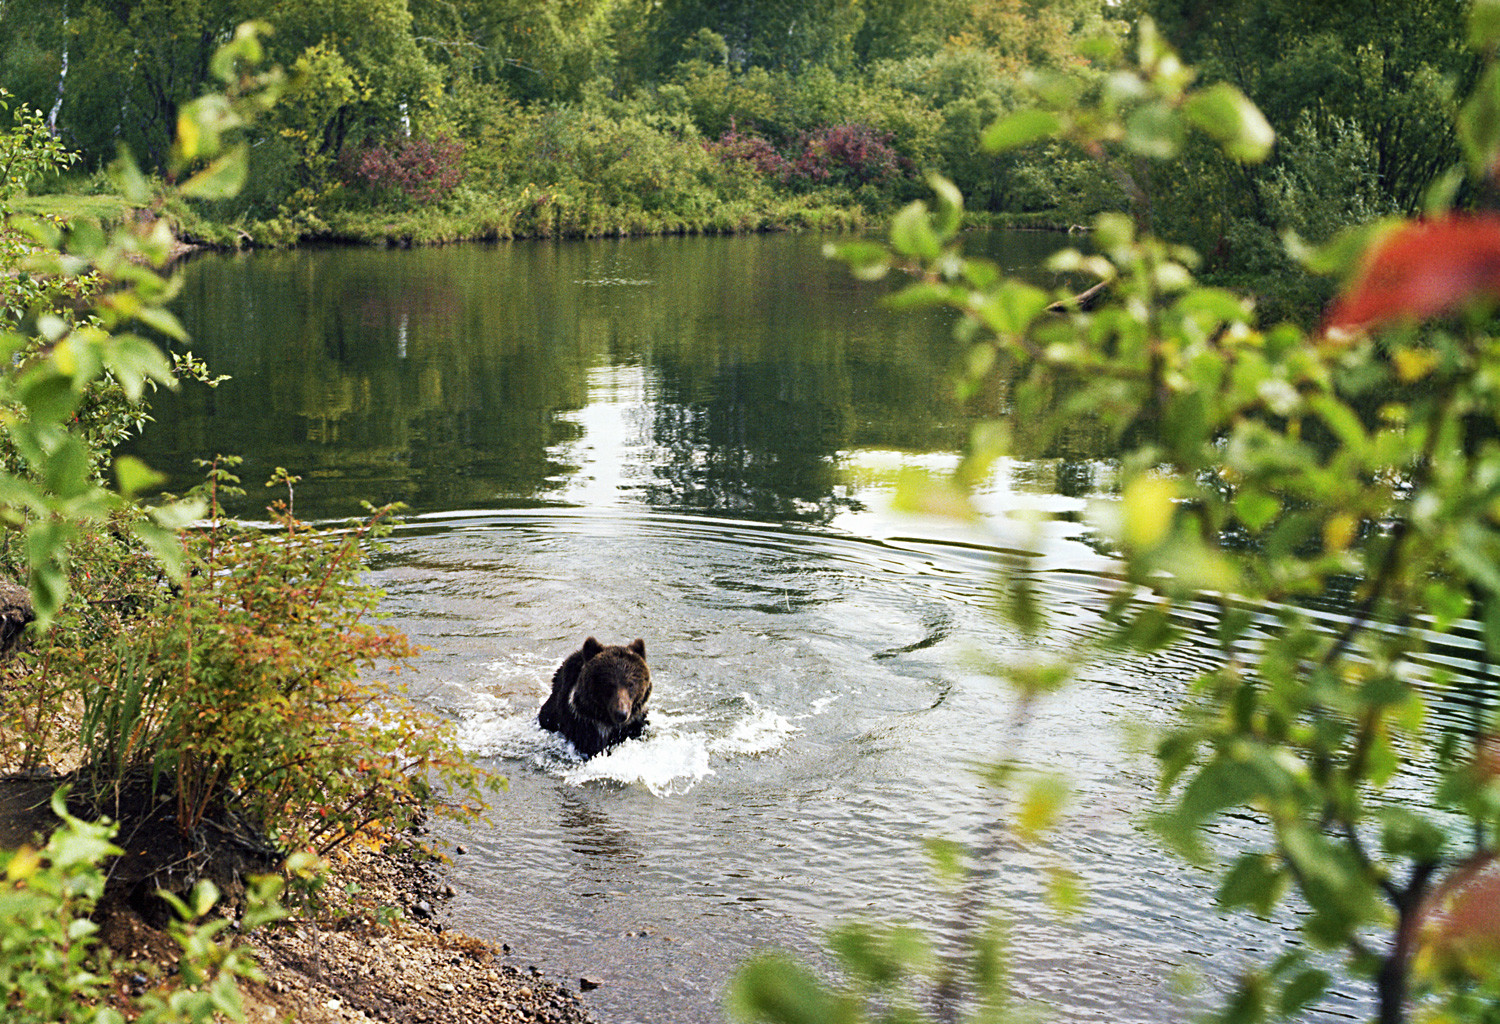 Bears can be observed safely from a boat, which many tour operators offer.